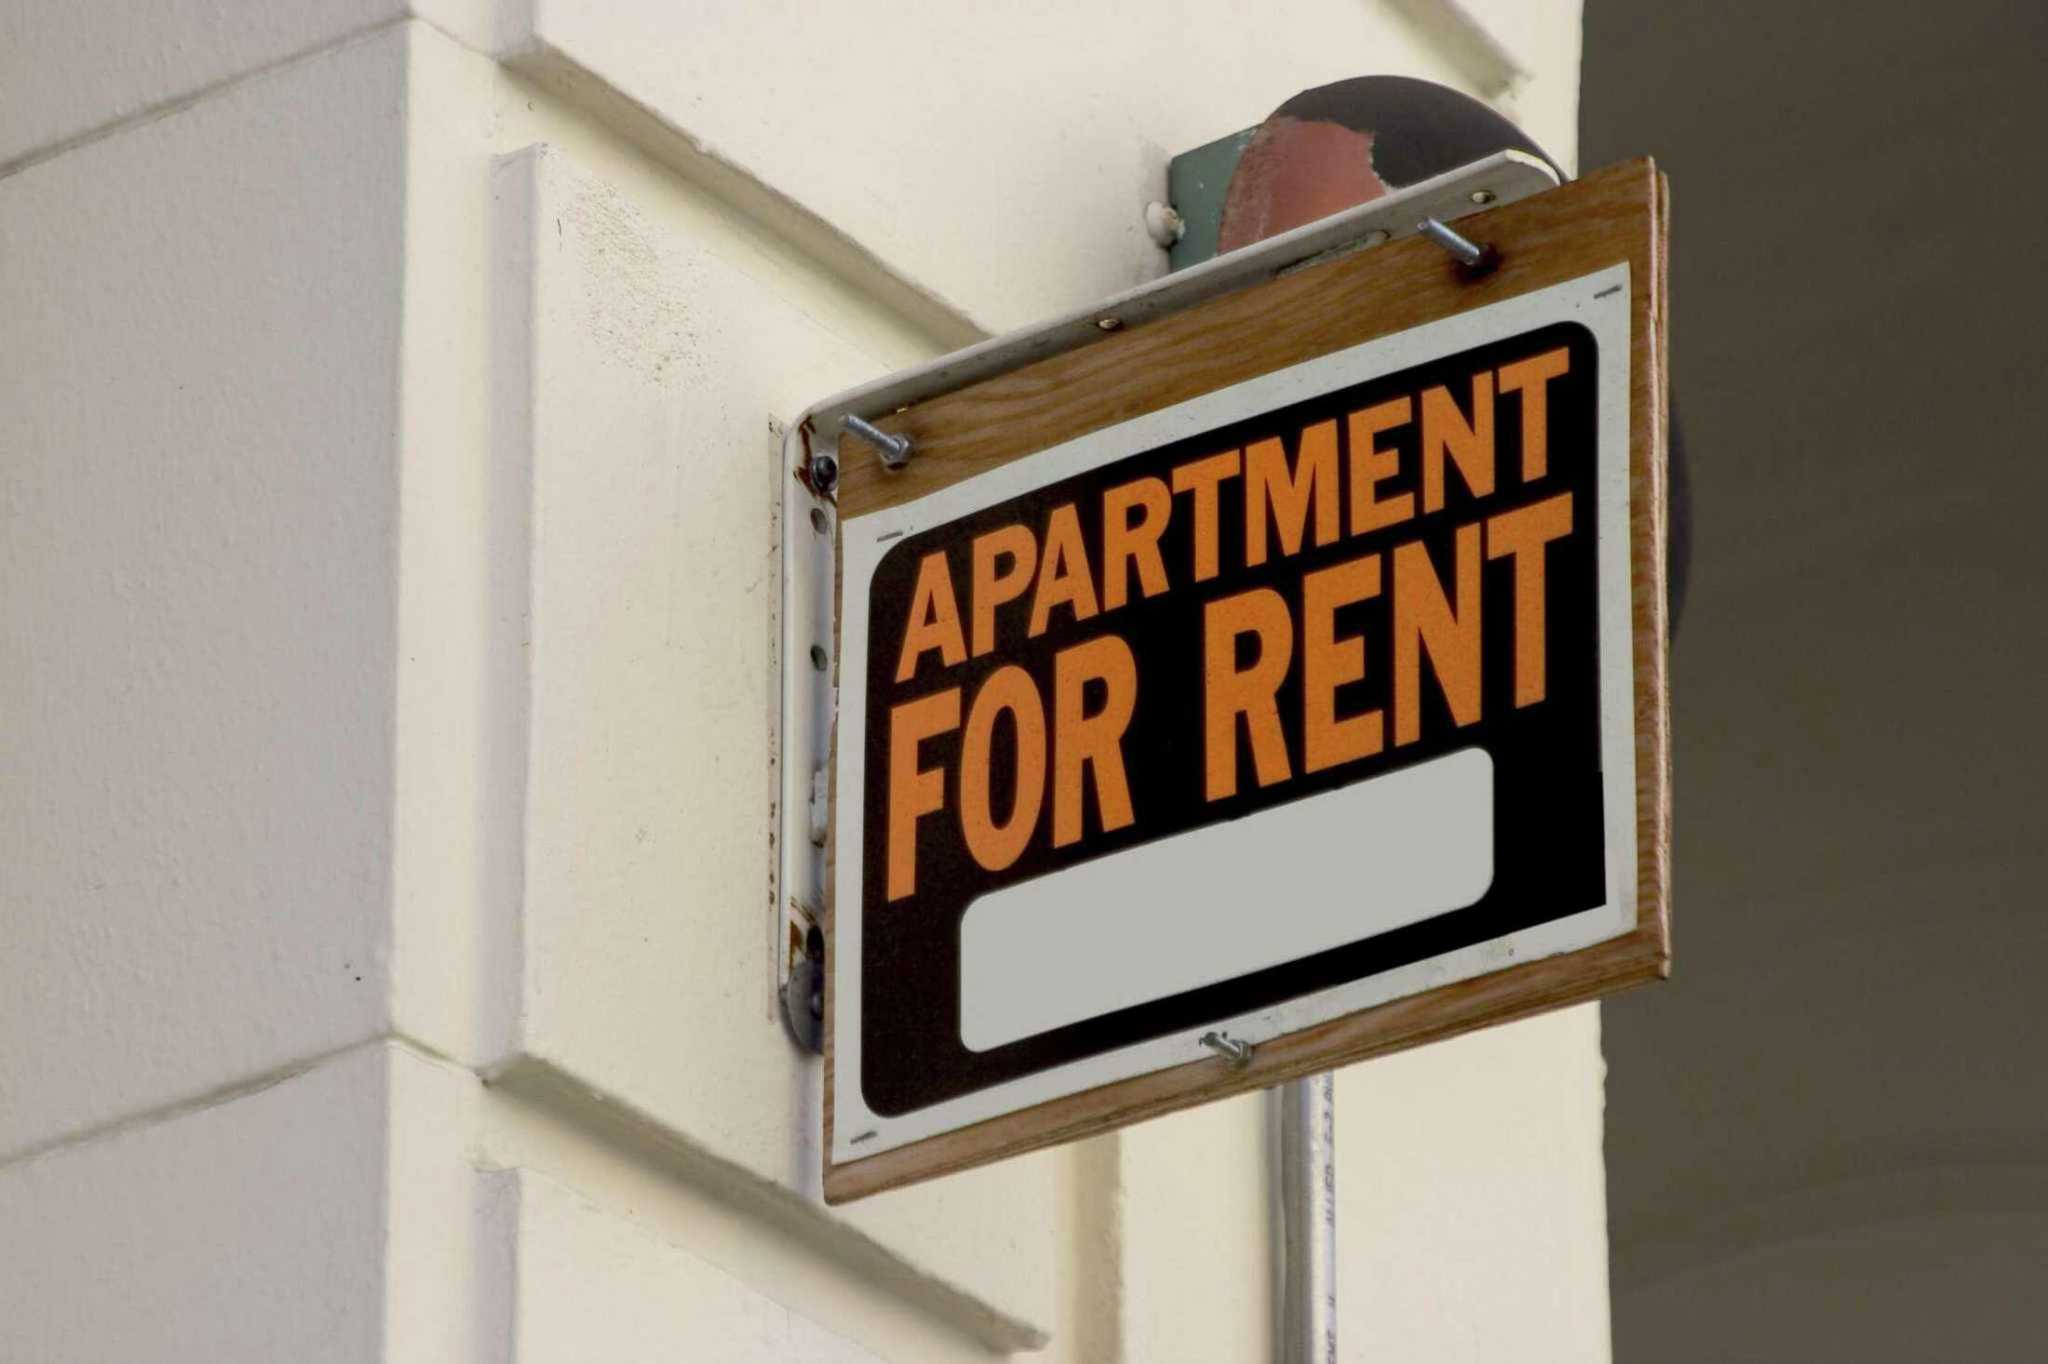 As housing costs outpace wage growth, S.A. renters left hurting - San Antonio Express